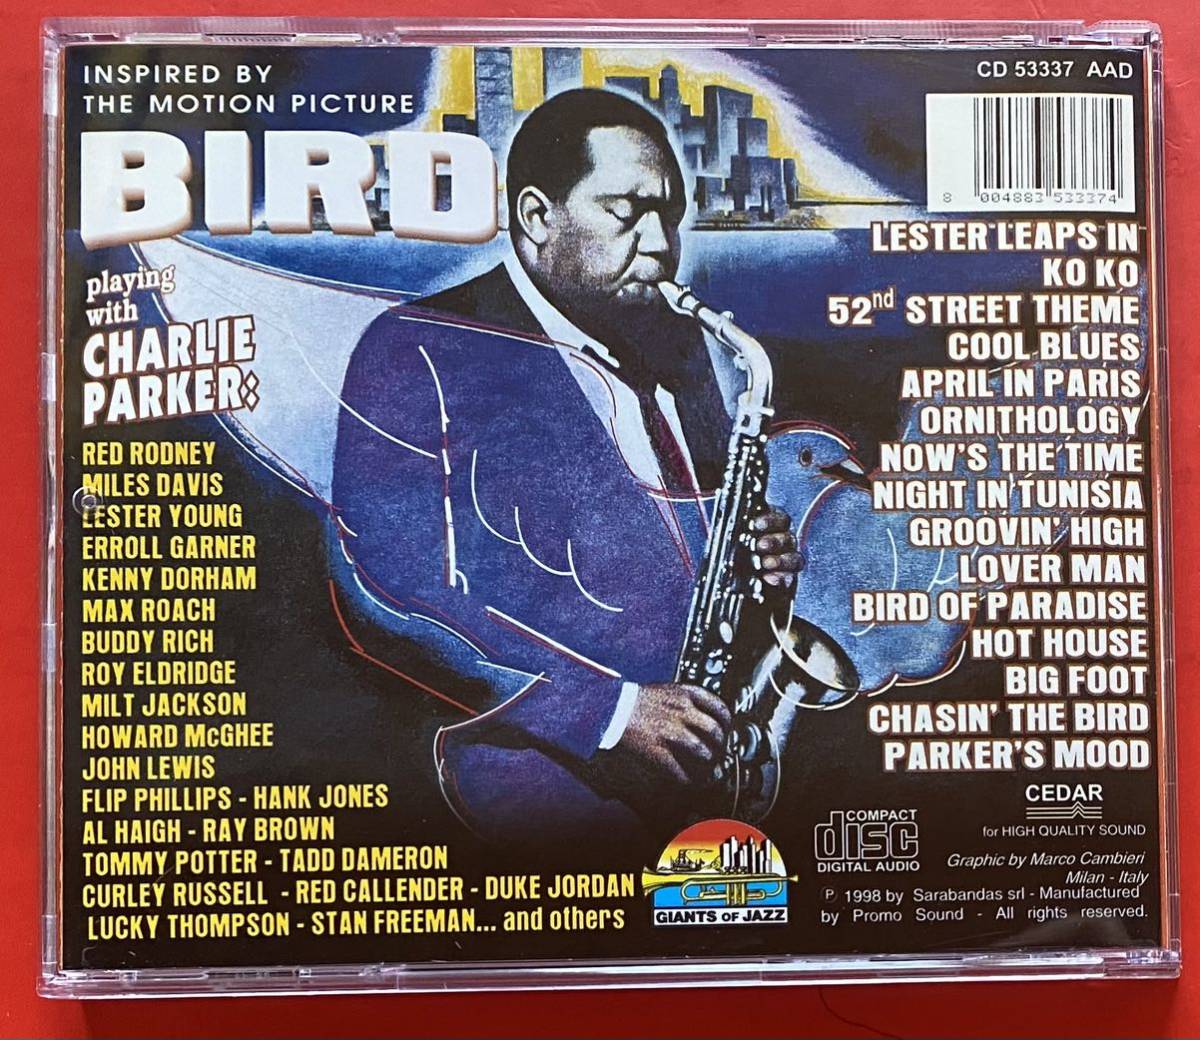 【CD】「INSPIRED BY THE MOTION PICTURE BIRD」CHARLIE PARKER BIRD チャーリー・パーカー 輸入盤 [06080134]_画像2